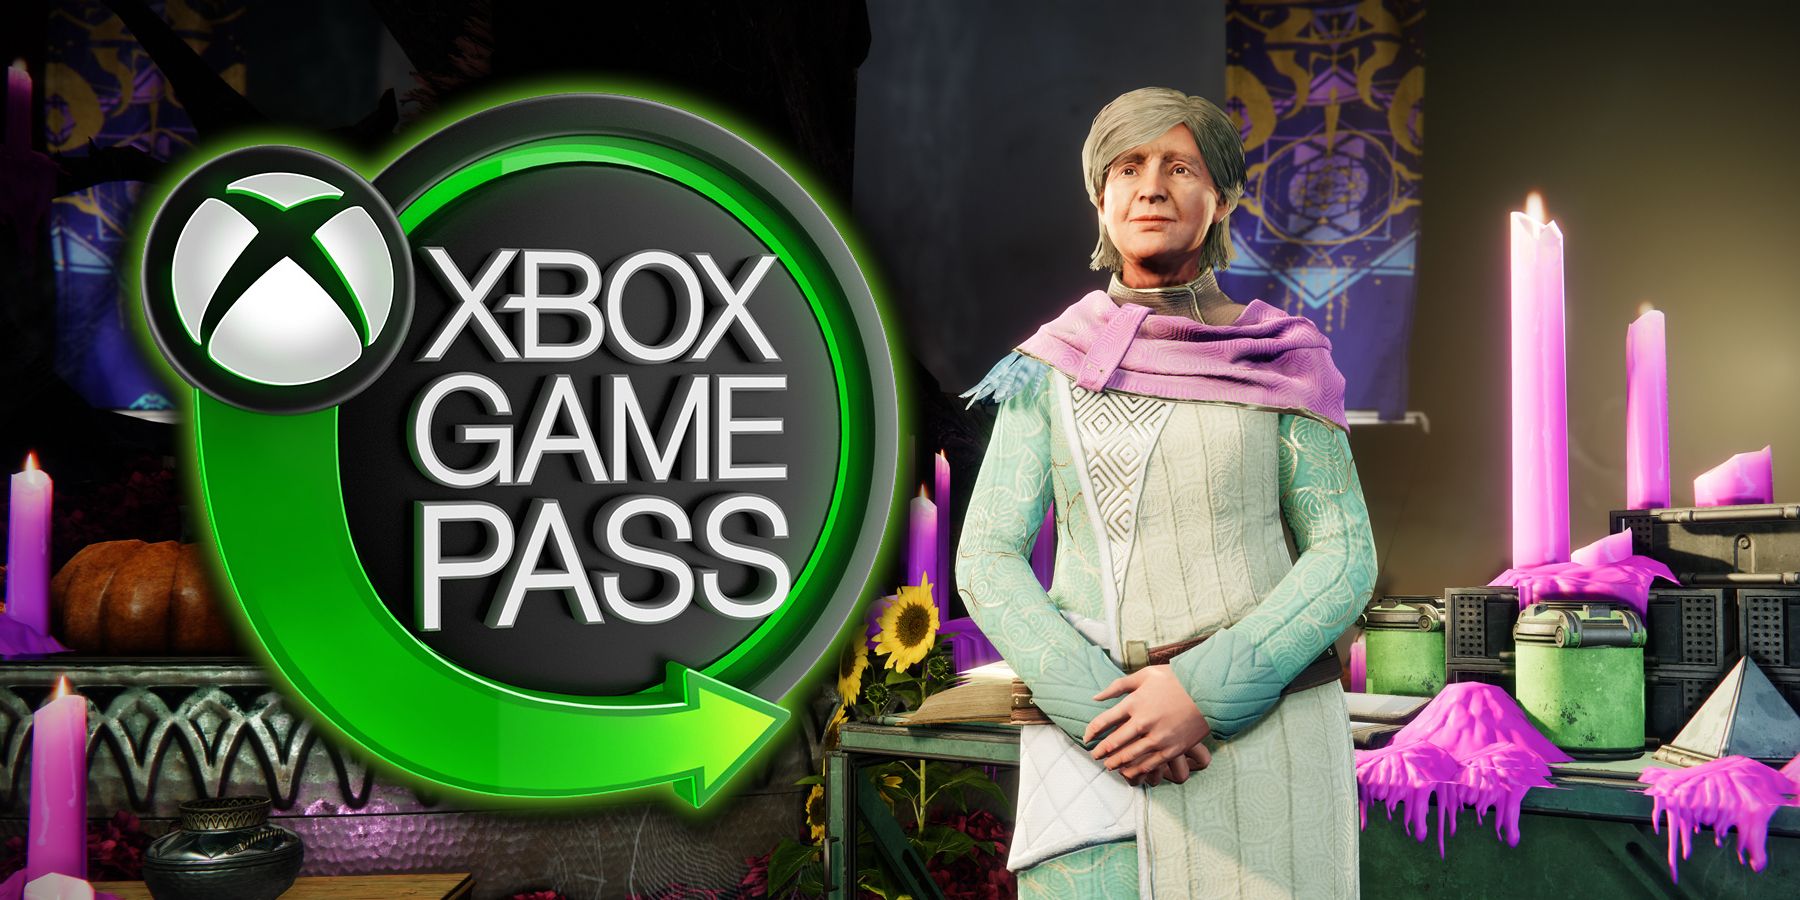 Coming Soon to Xbox Game Pass for PC & Console: Destiny 2